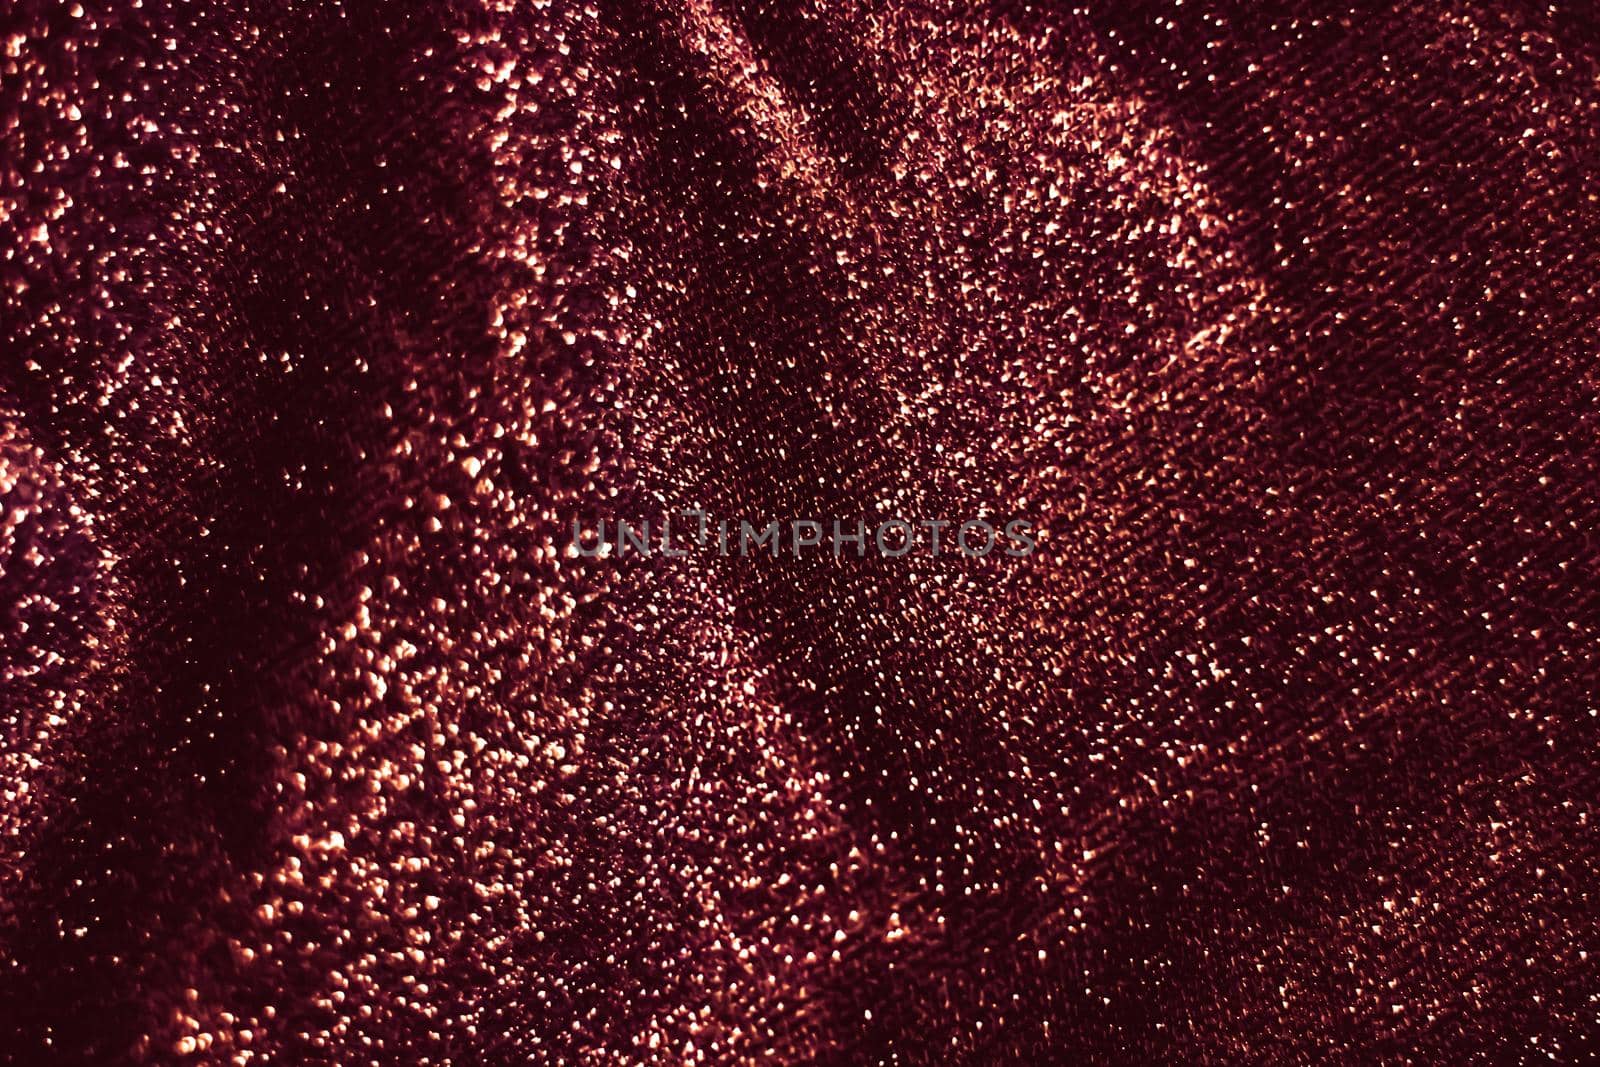 Luxe glowing texture, night club branding and New Years party concept - Red holiday sparkling glitter abstract background, luxury shiny fabric material for glamour design and festive invitation